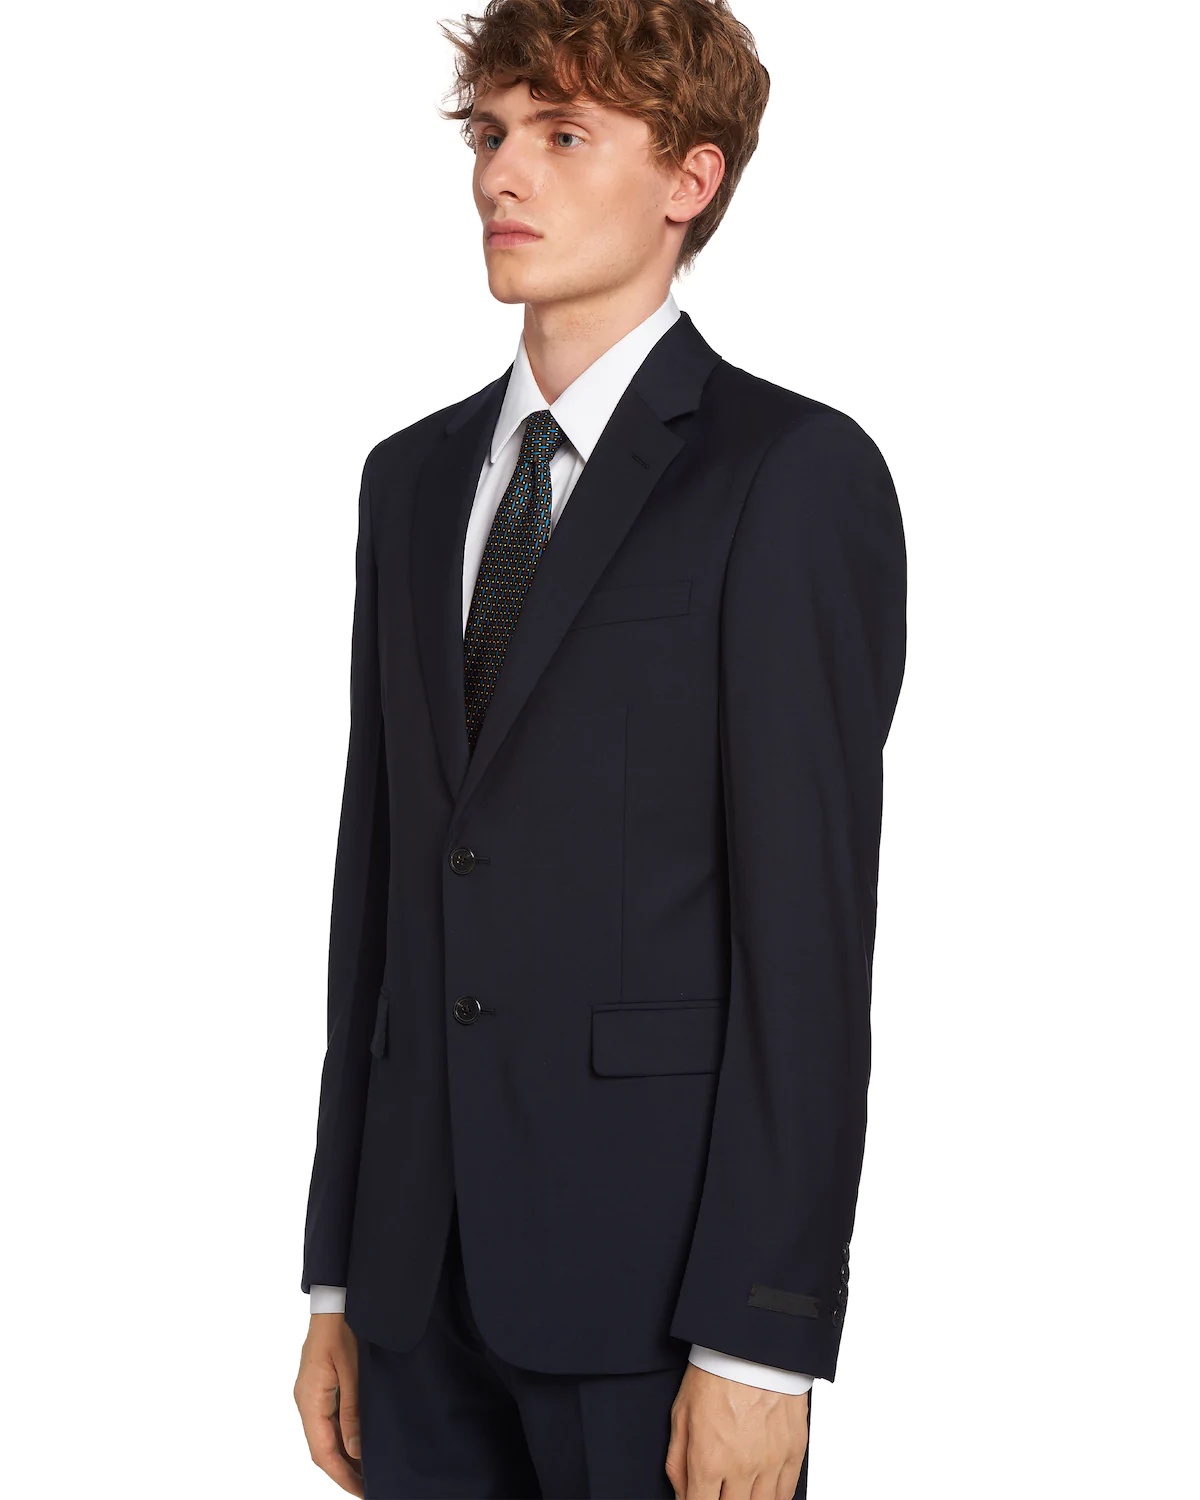 Mohair Single-Breasted Suit - 5